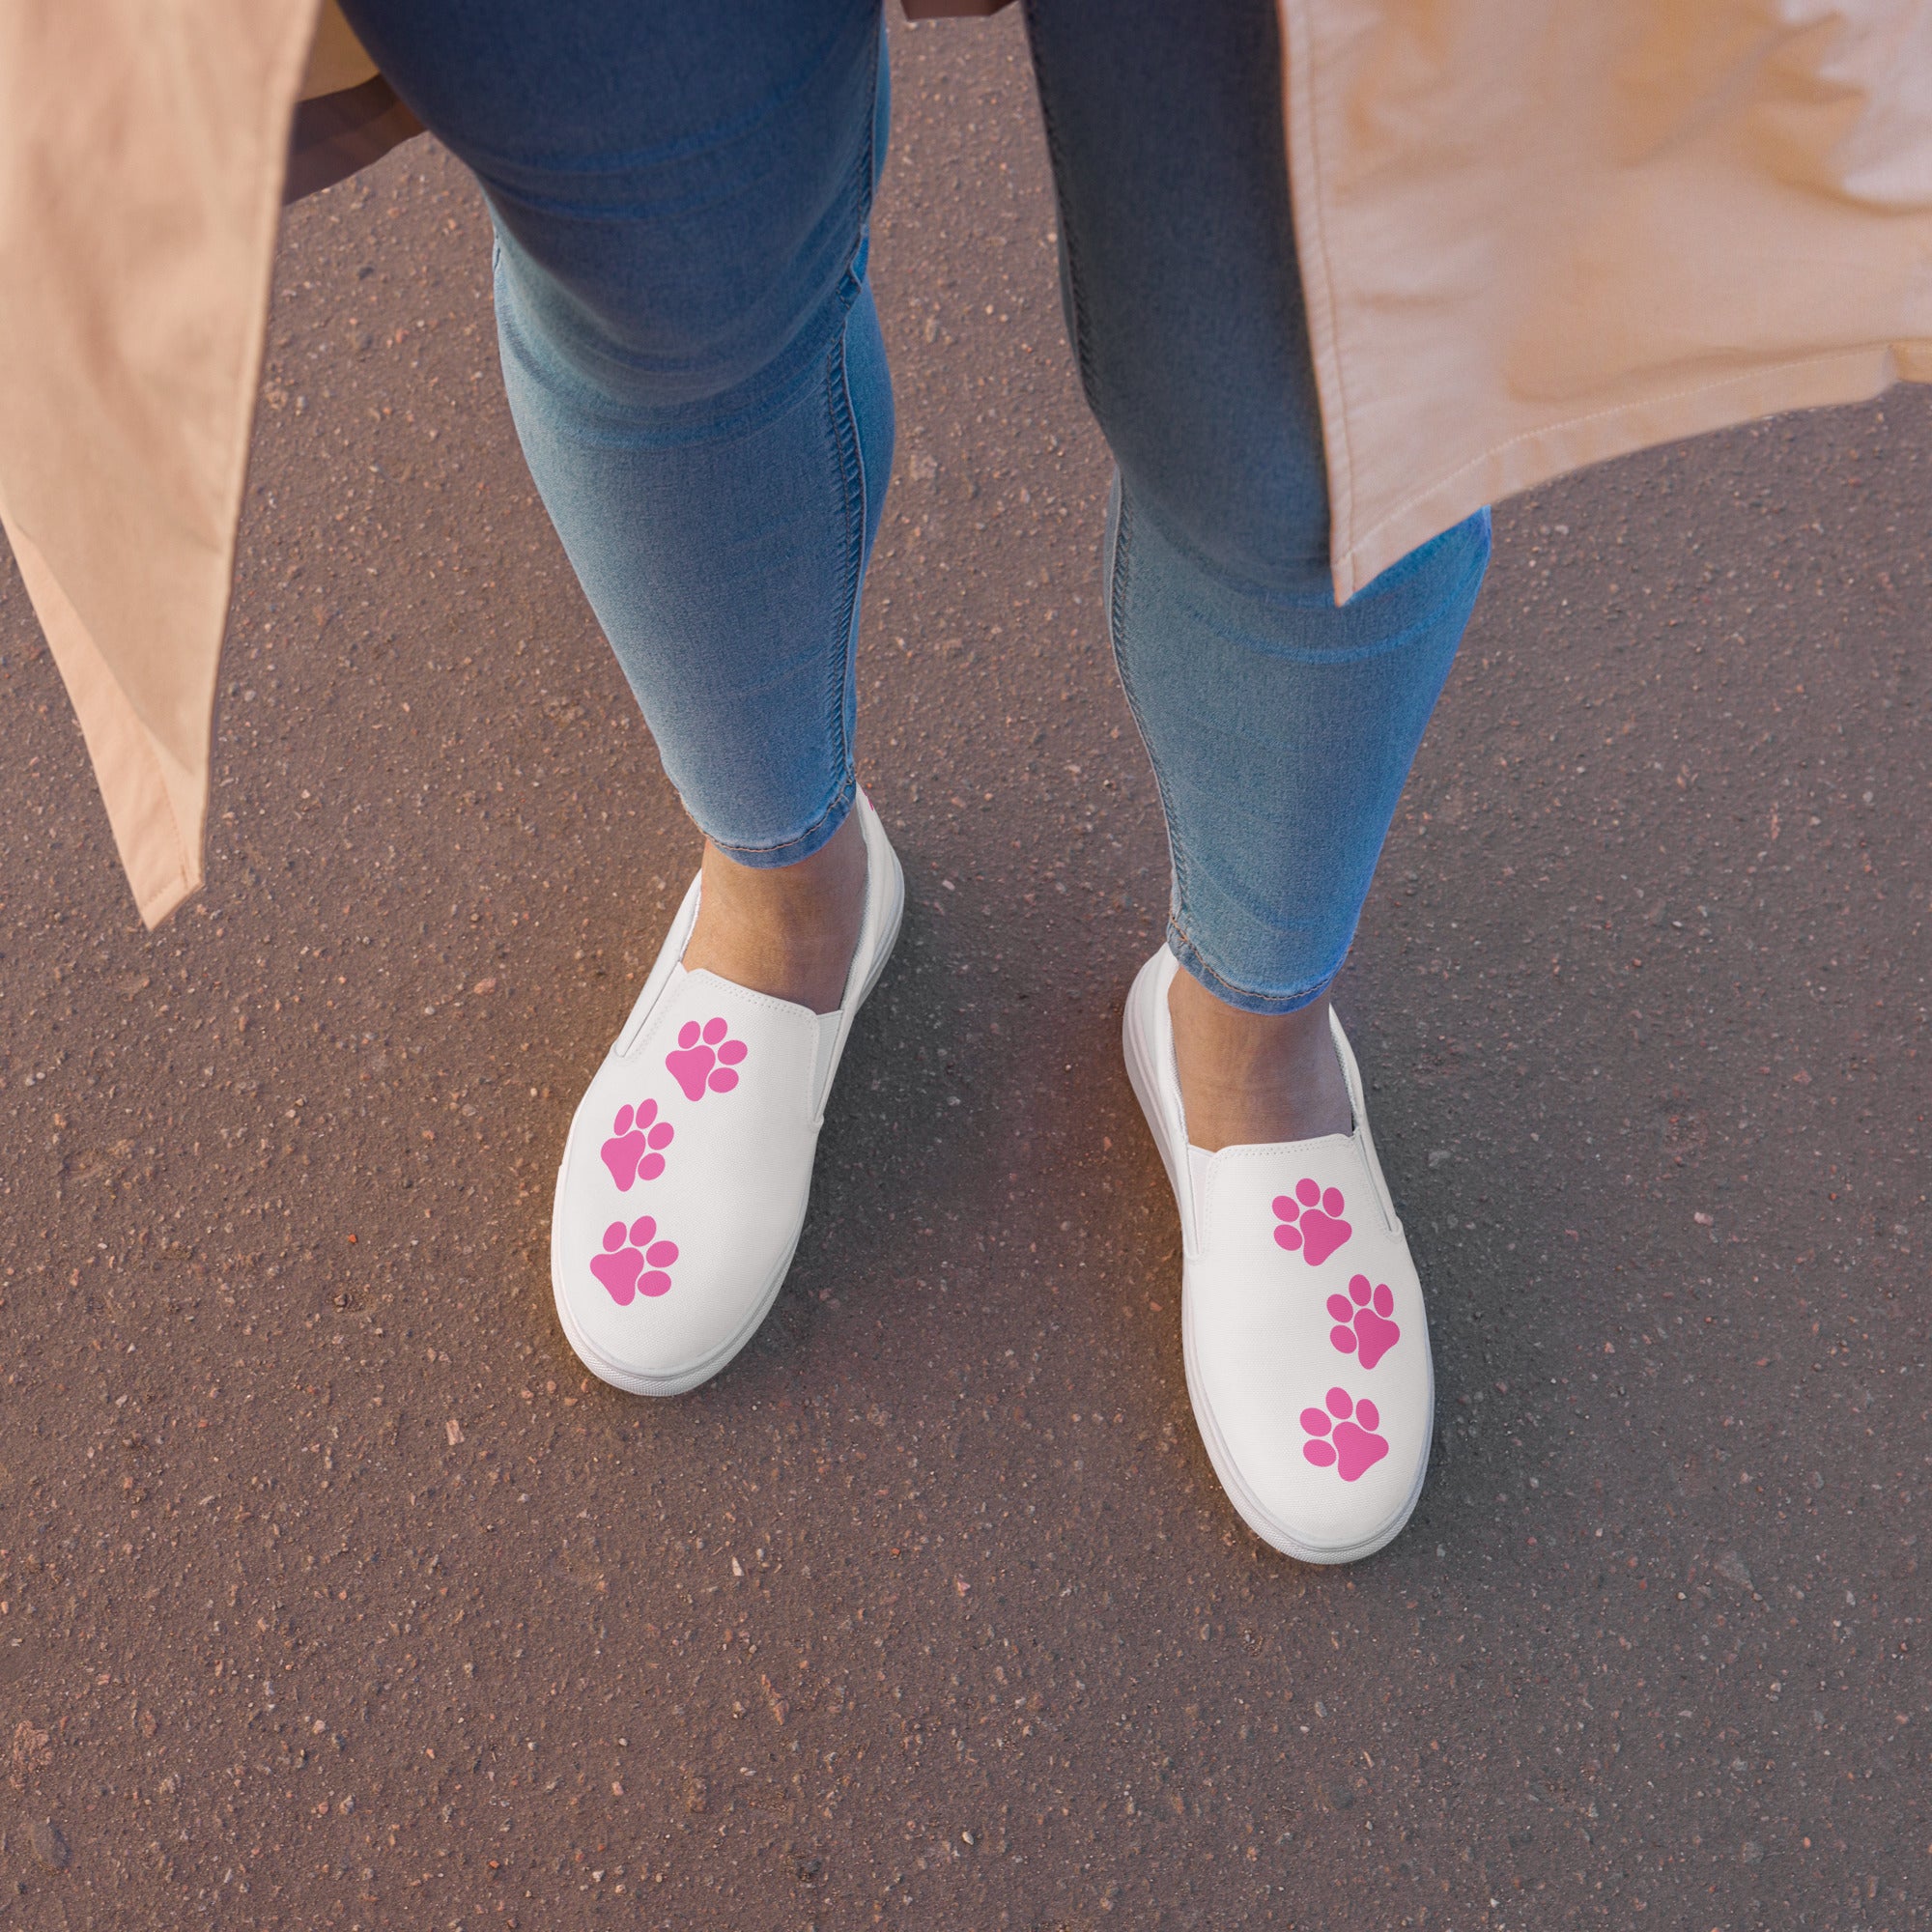 Women’s slip-on Hot Pink Paw shoes